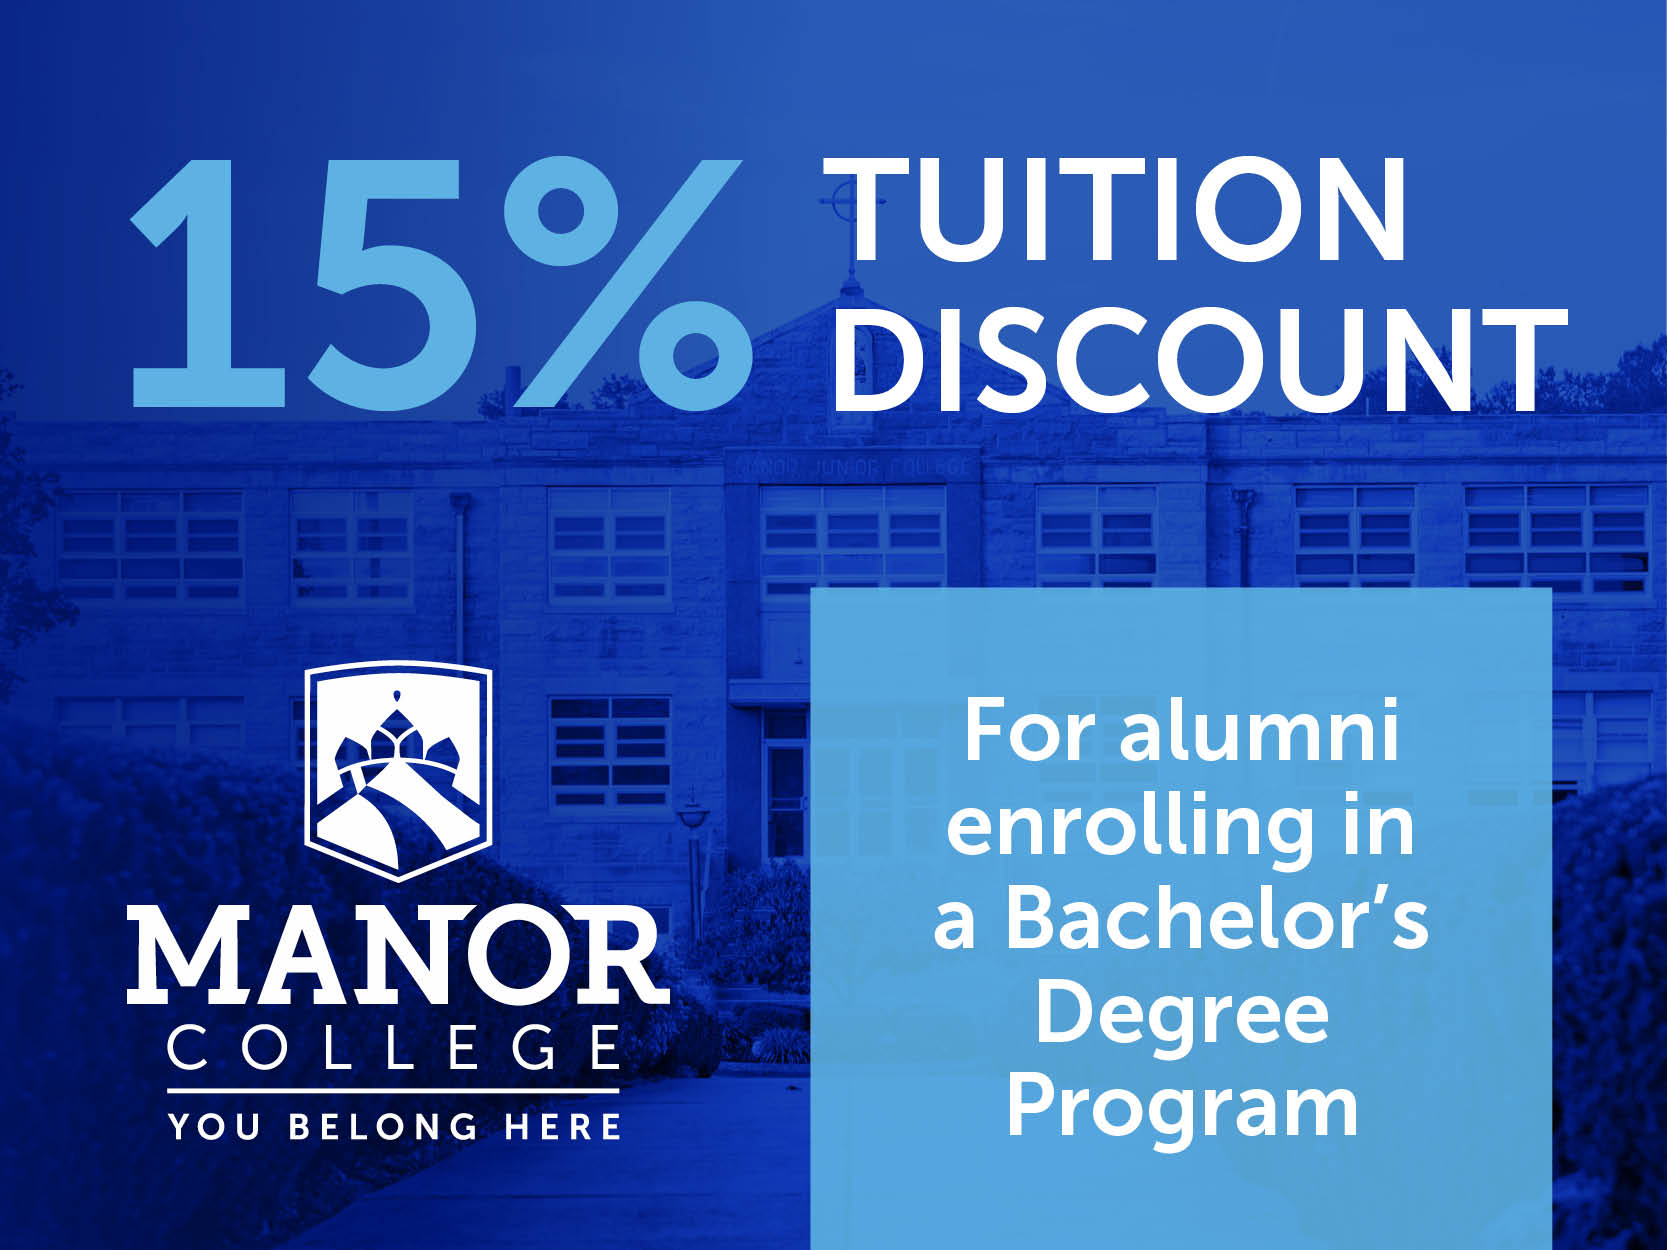 15% off tuition discount for alumni enrolling in a Bachelor’s Degree Program Graphic